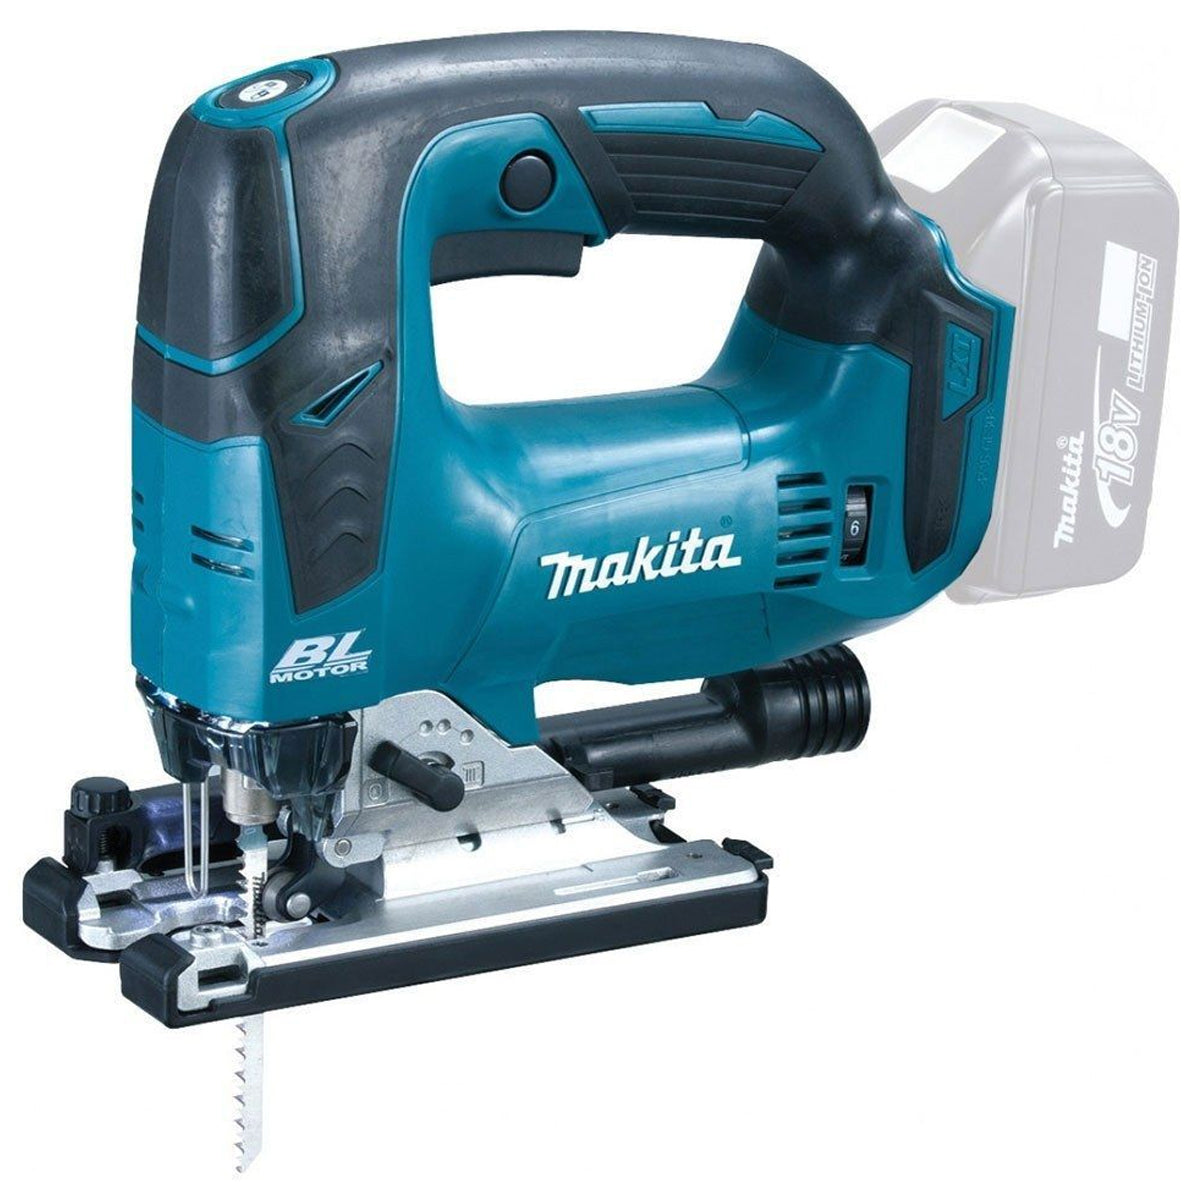 Makita DLX2202TJ1 18V LXT Brushless Combi Drill & Jigsaw Combo Kit With 2 x 5.0Ah Batteries Charger In Case